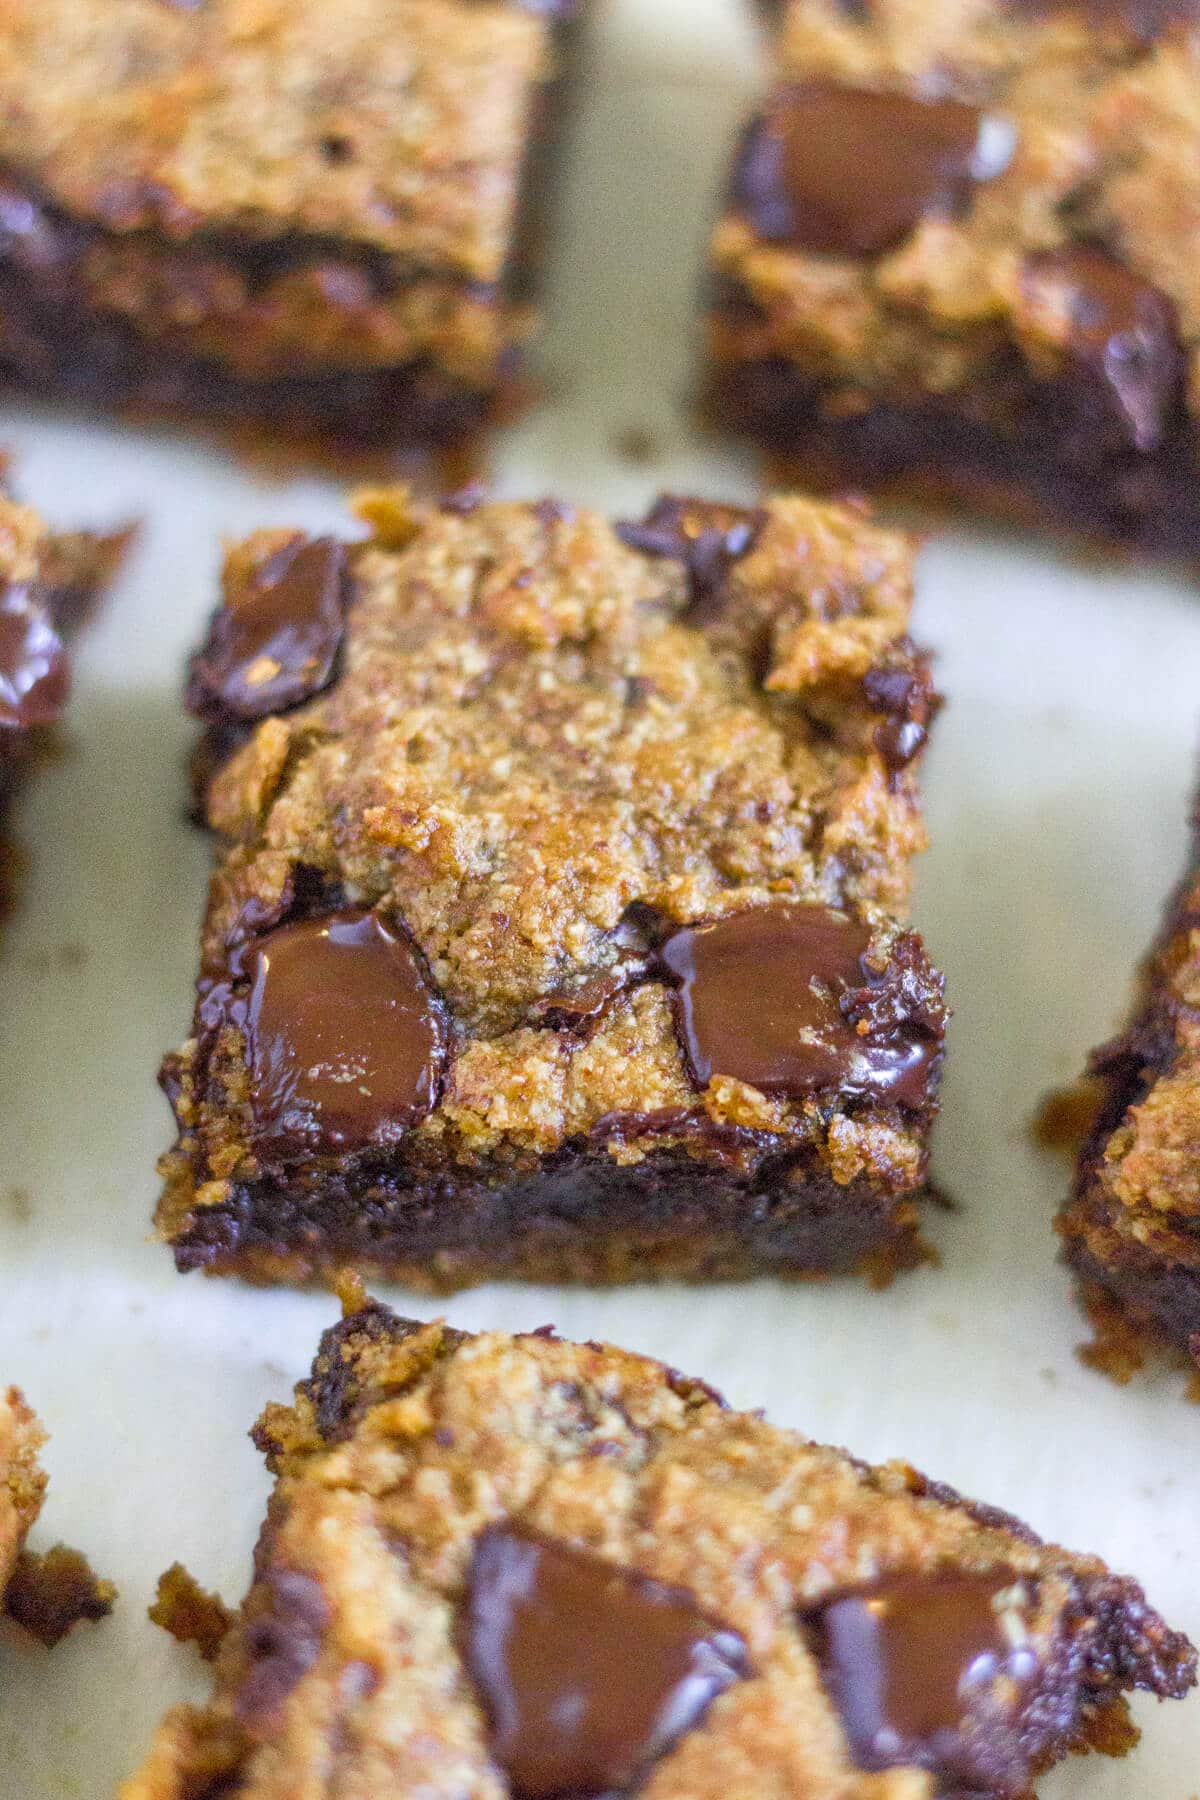 Paleo Pumpkin Chocolate Chunk Blondies are a healthier alternative to all your pumpkin desserts! These paleo blondies are thick and chewy and filled with pumpkin and extra large chocolate chunks.